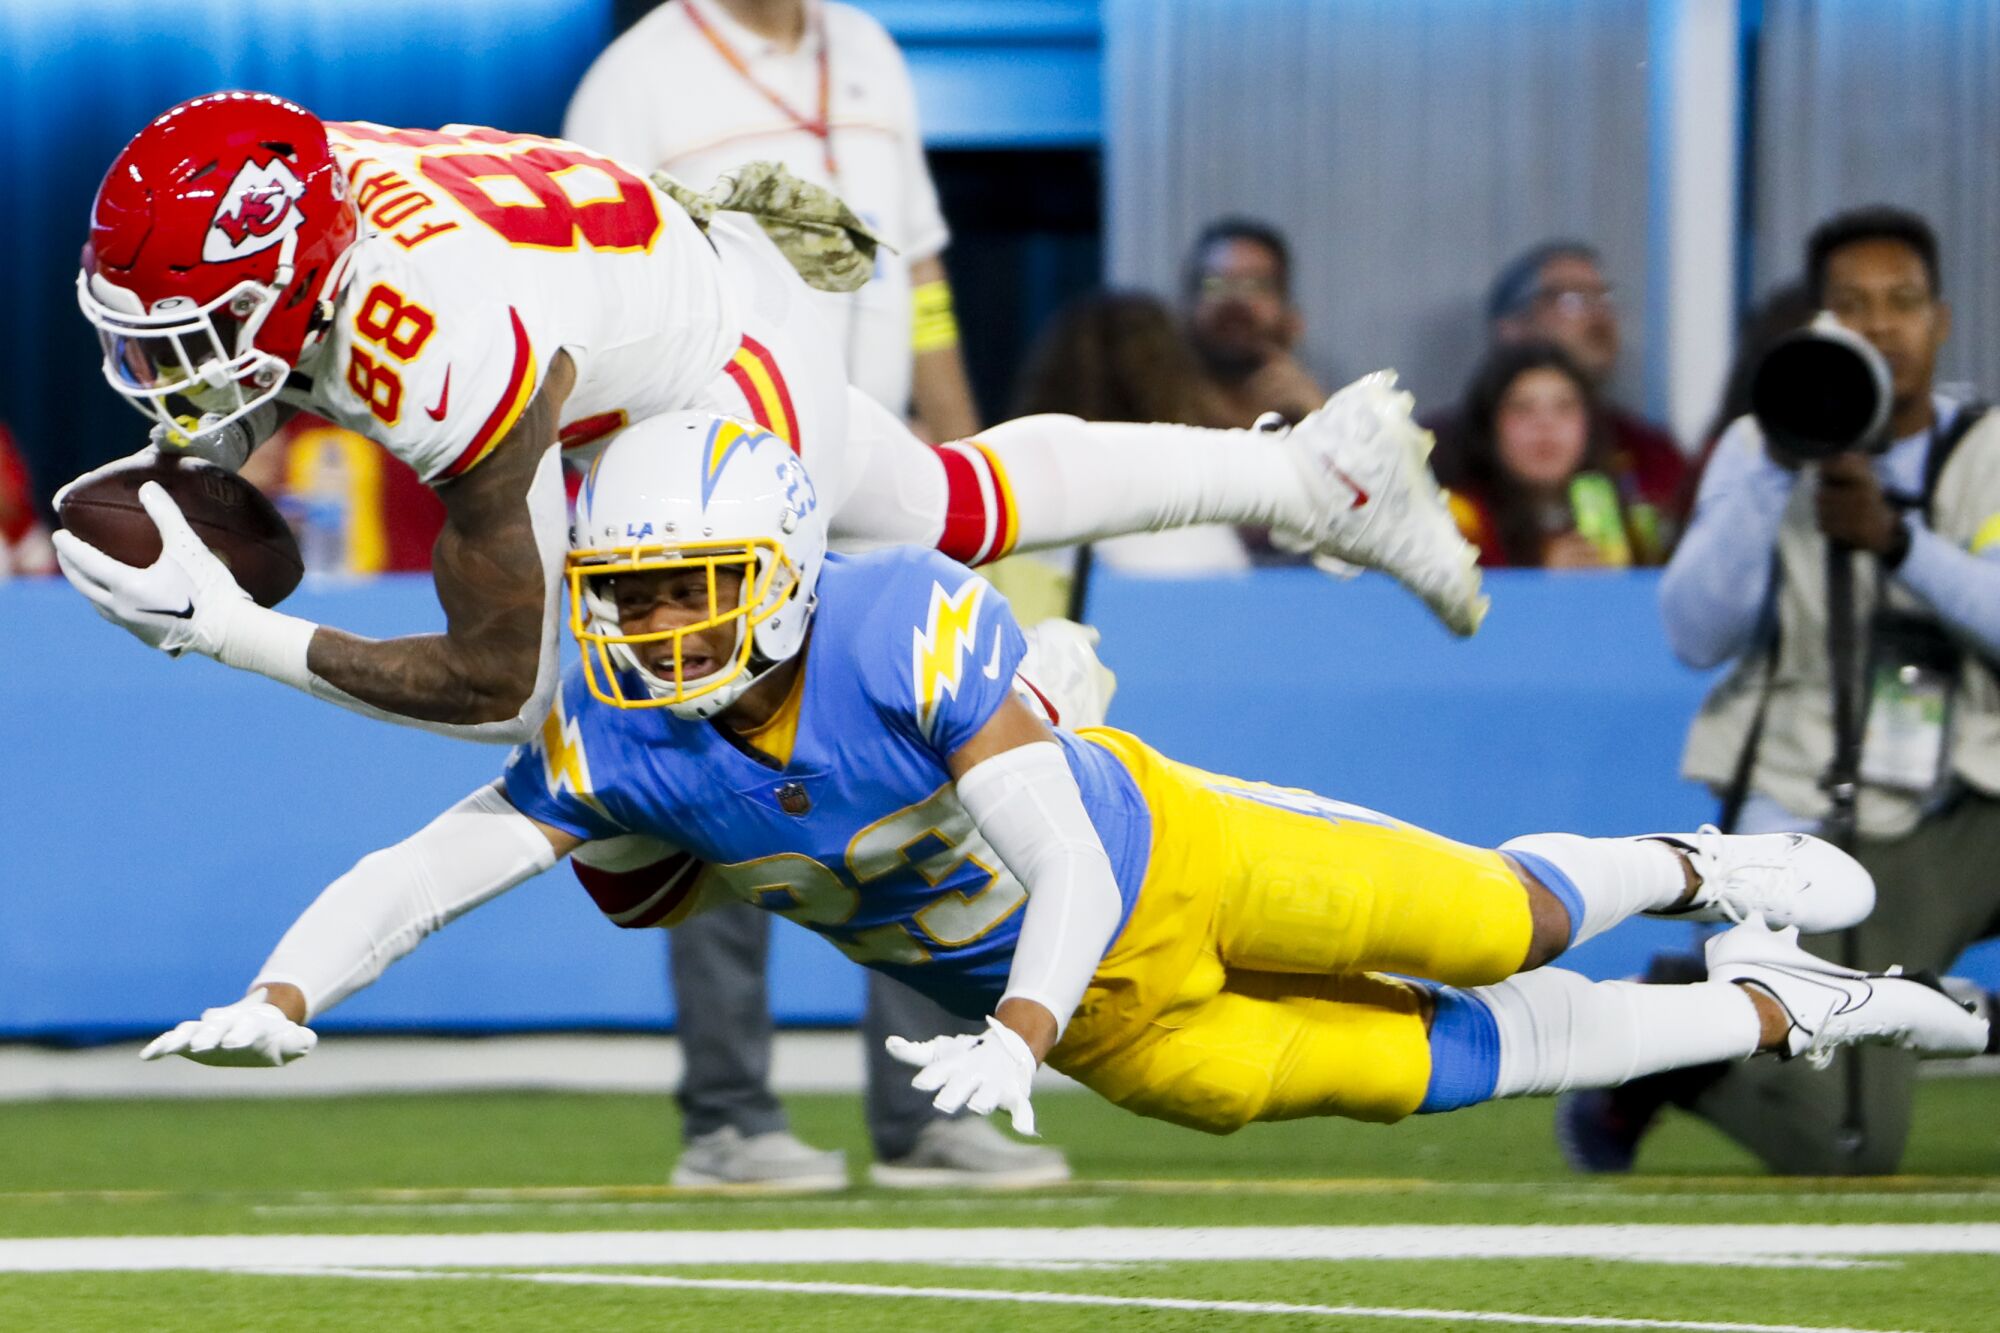 Chiefs tight end Jody Fortson falls to the ground after a catch while Chargers cornerback Bryce Callahan defends.